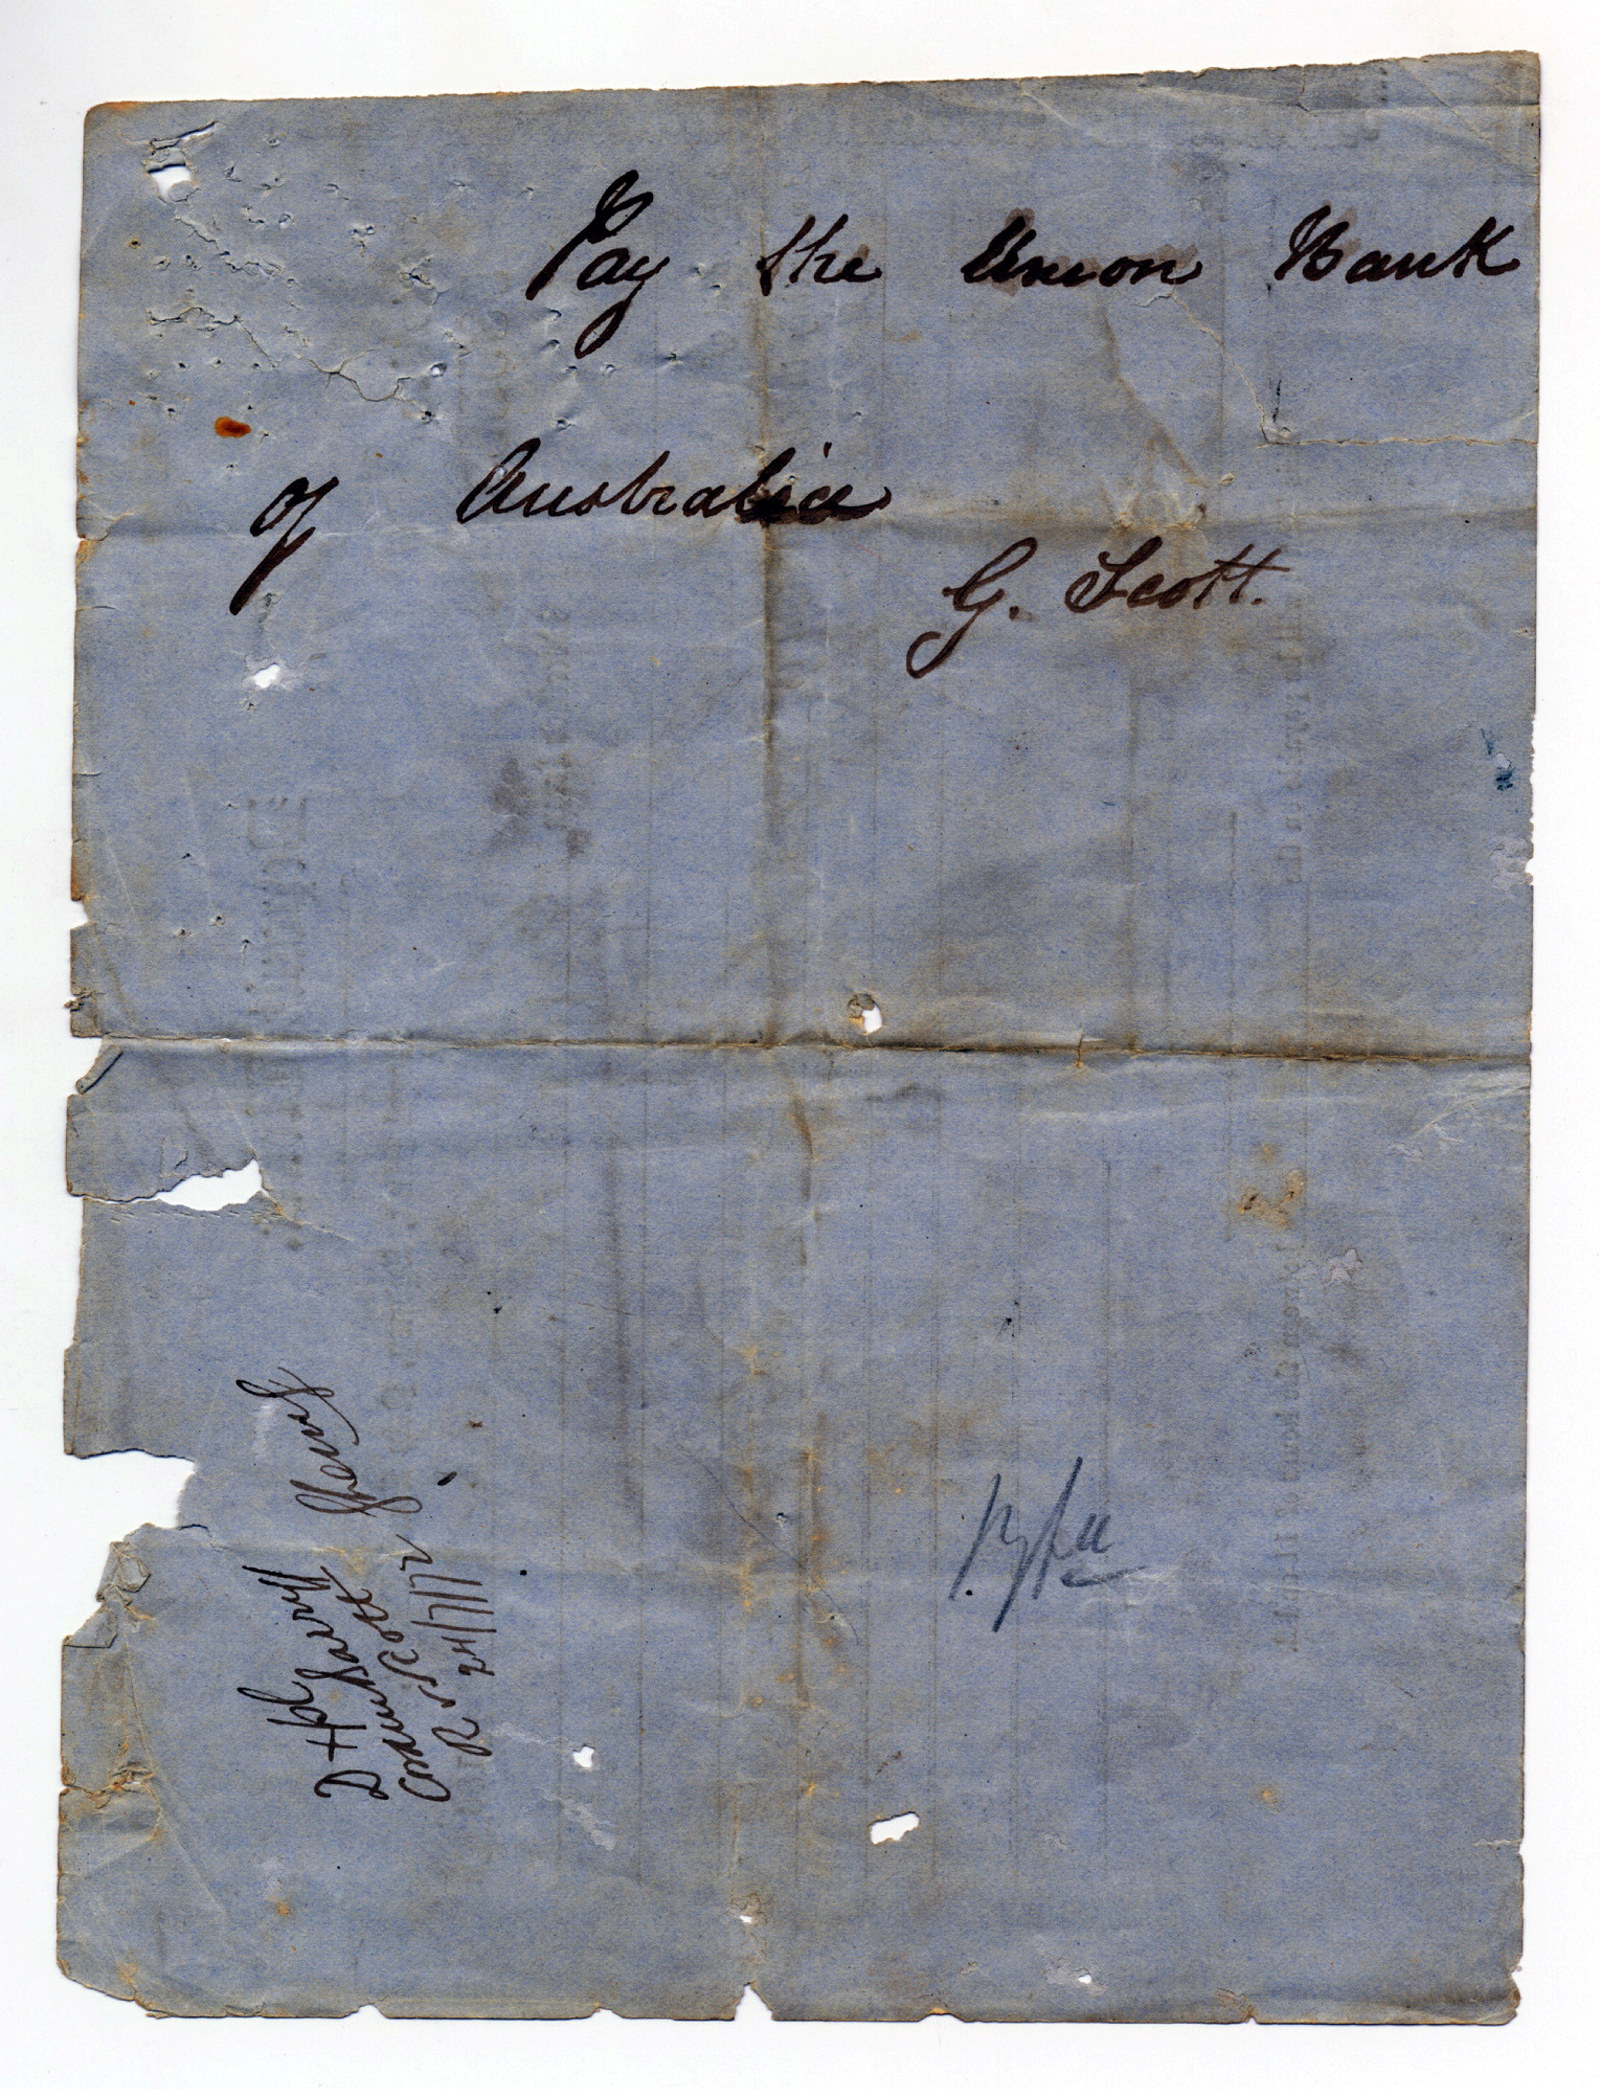 Back of worn paper form with handwritten note.